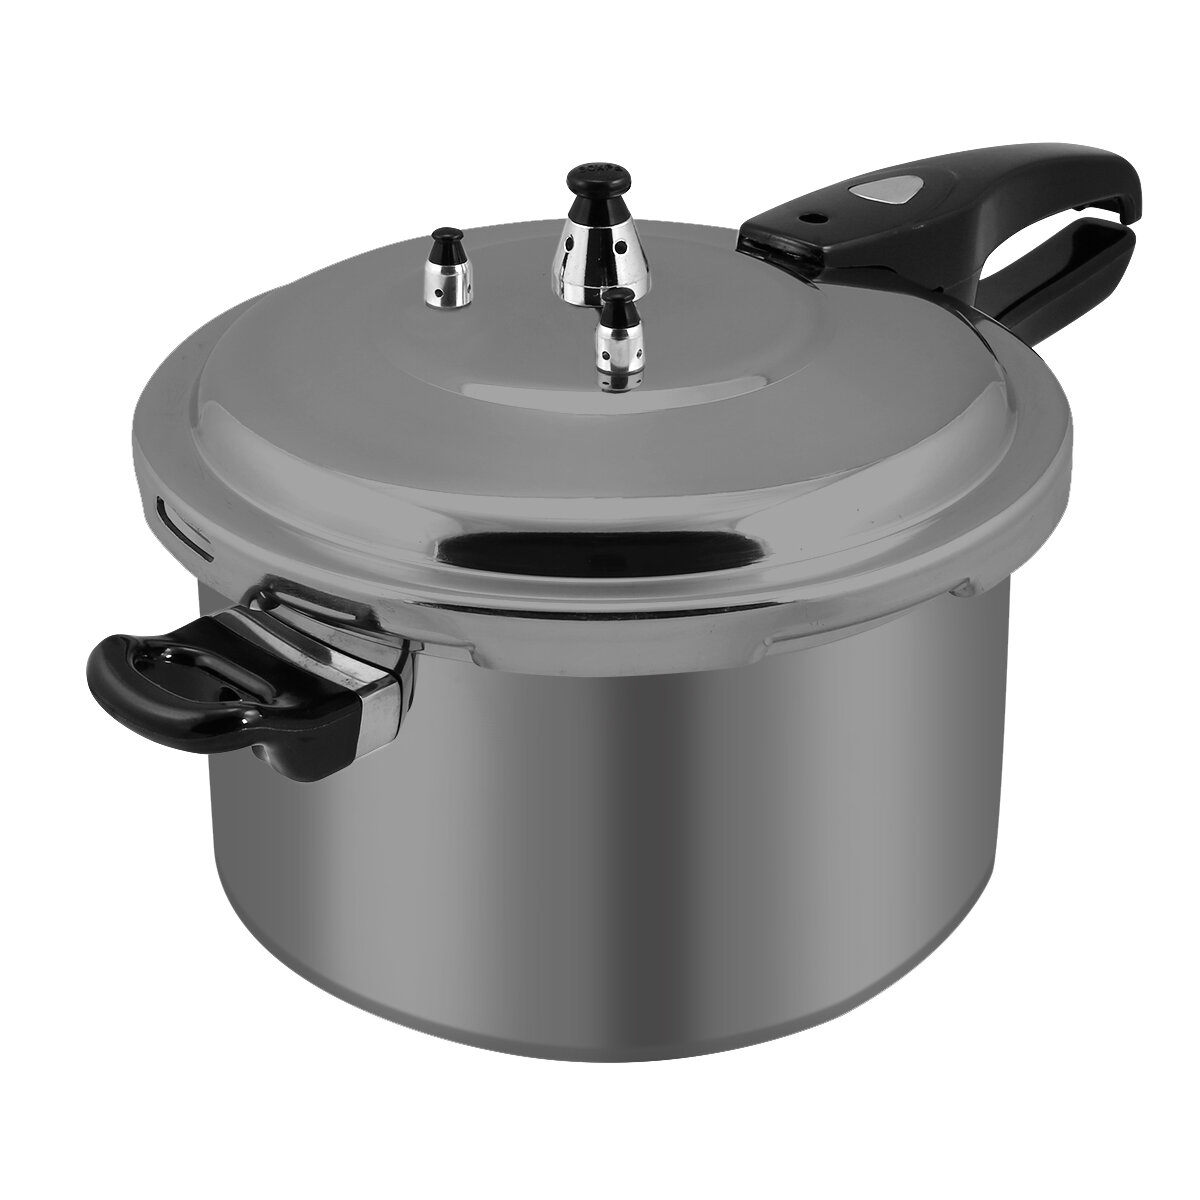 Power A EZLock 12-Quart Pressure Cooker in Stainless Steel